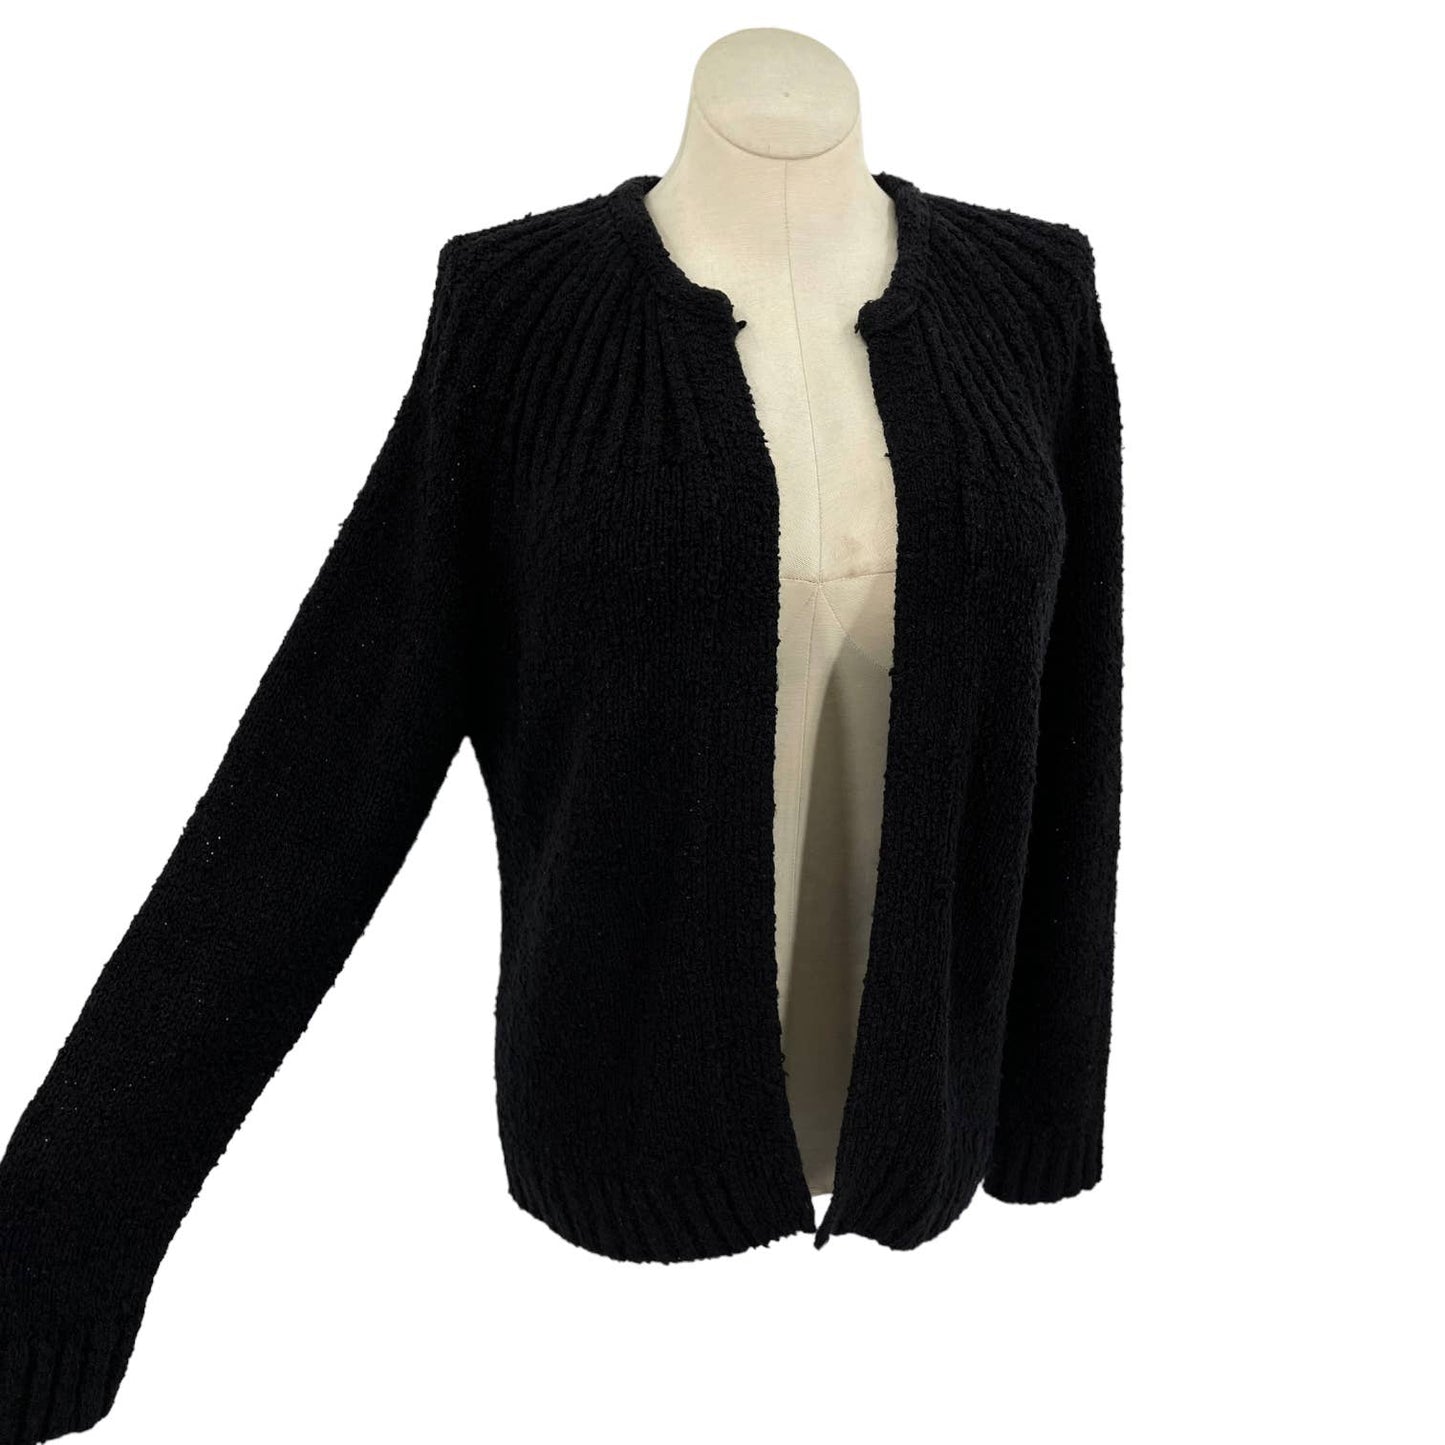 Vintage 80s Black Nubby Cardigan Sweater Open Front by Le Chois II Size 40